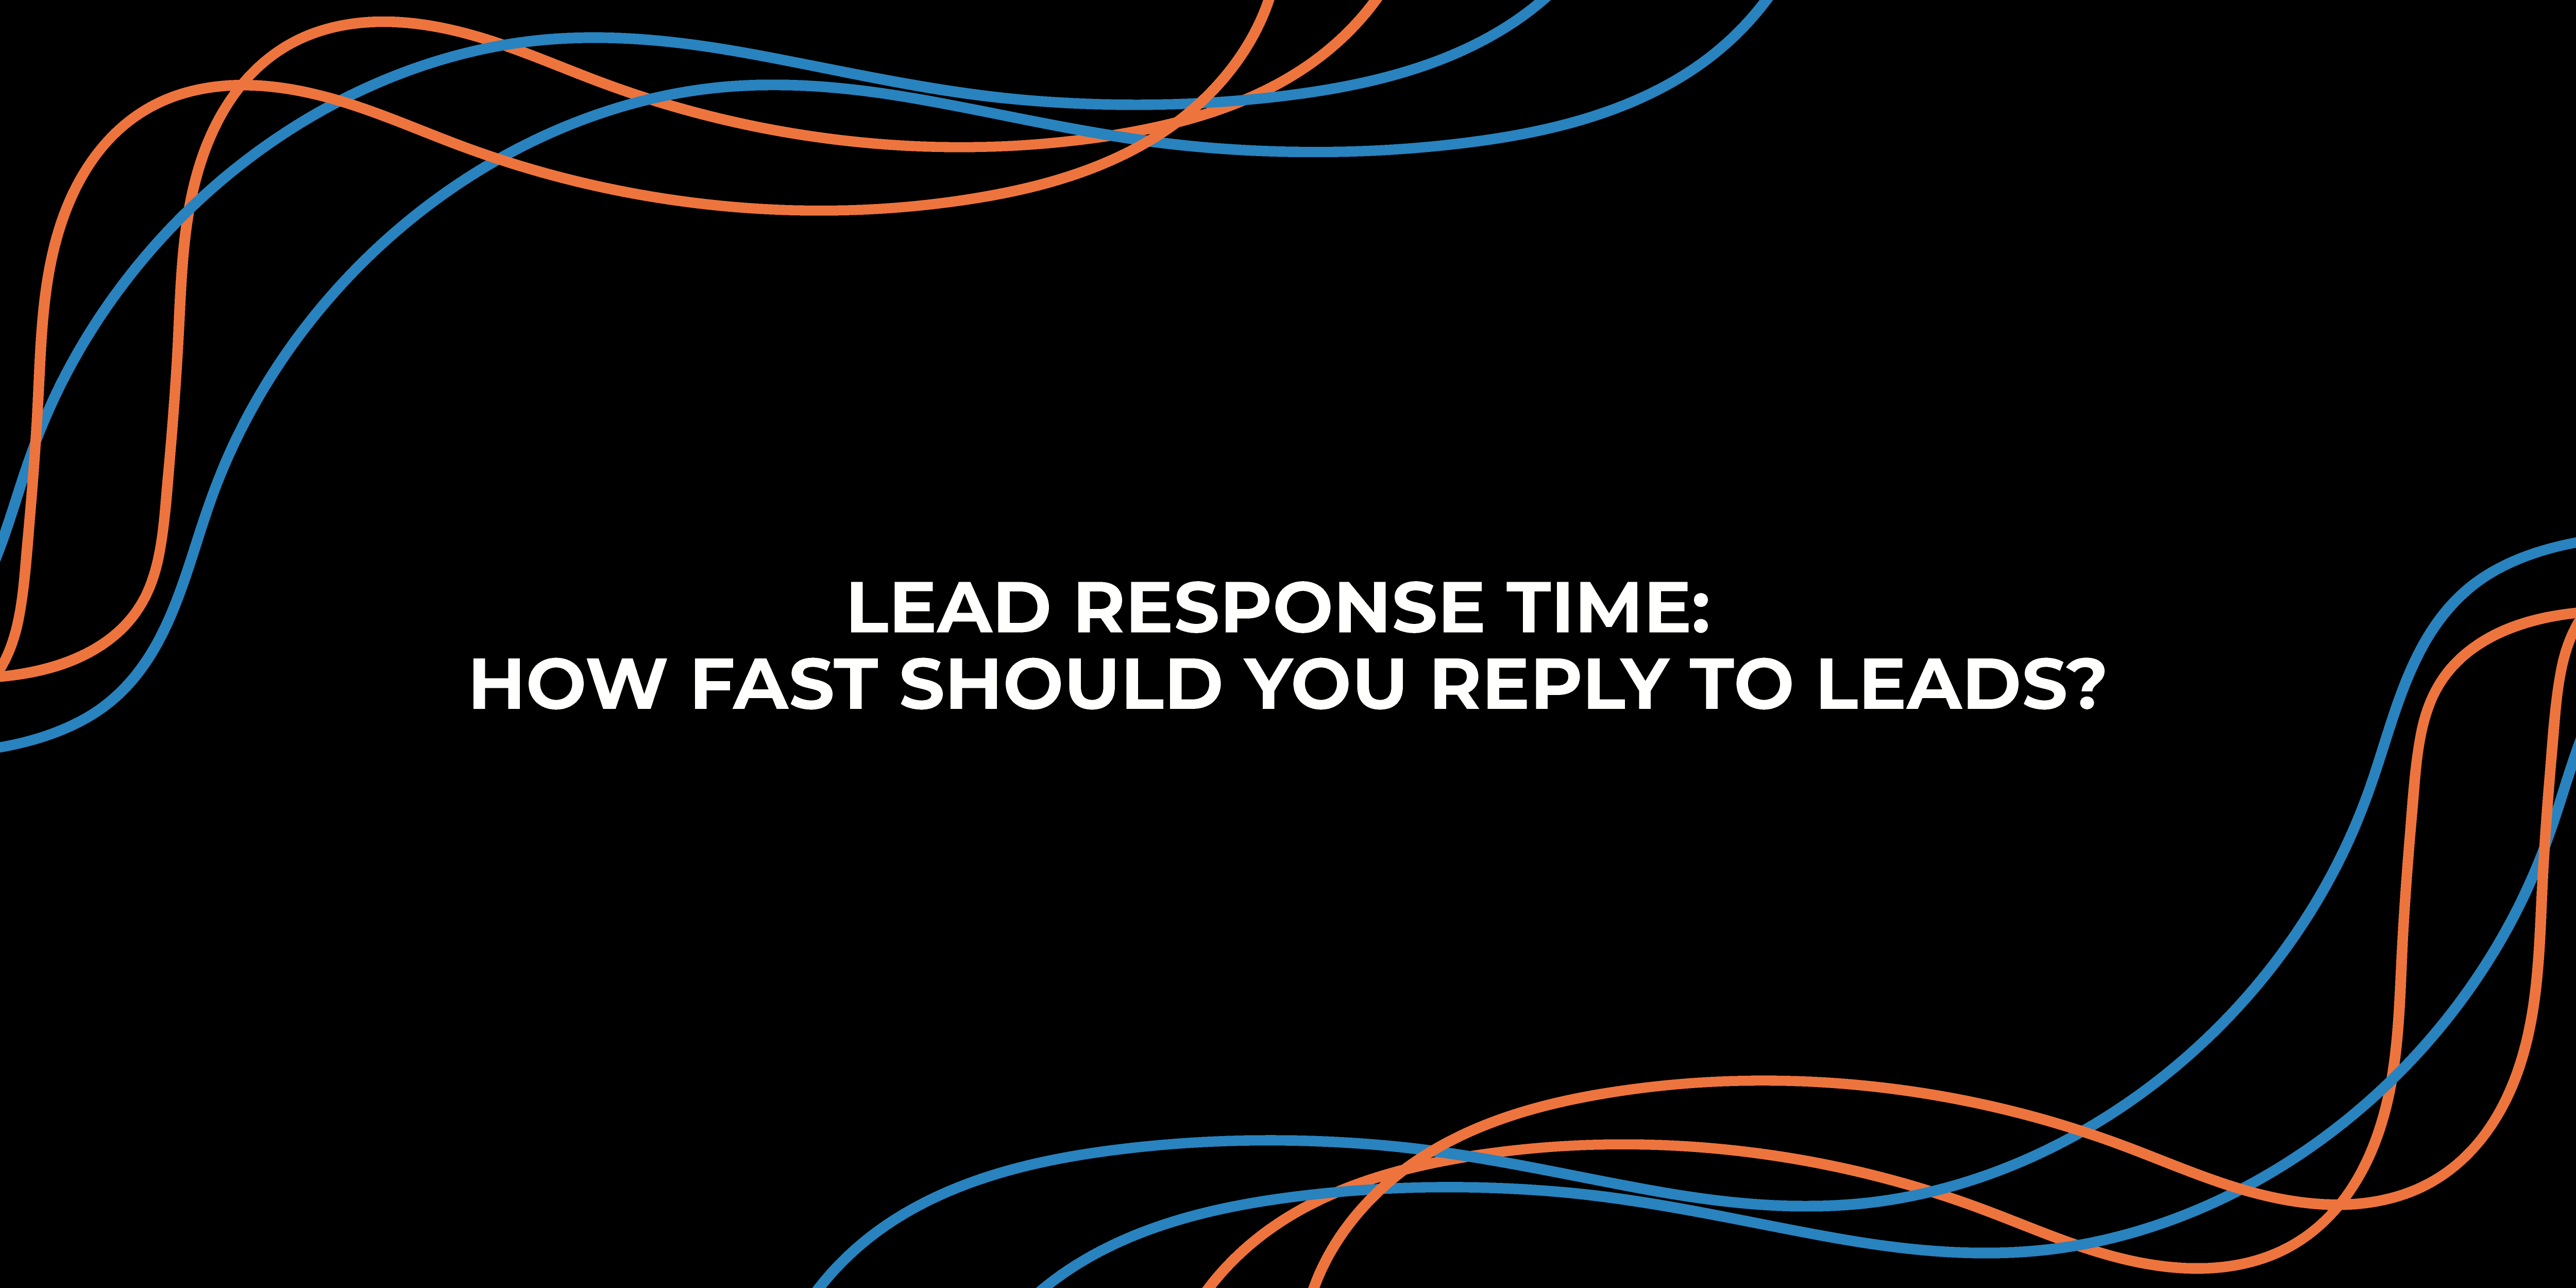 Lead Response Time: How Fast Should You Reply To Leads?